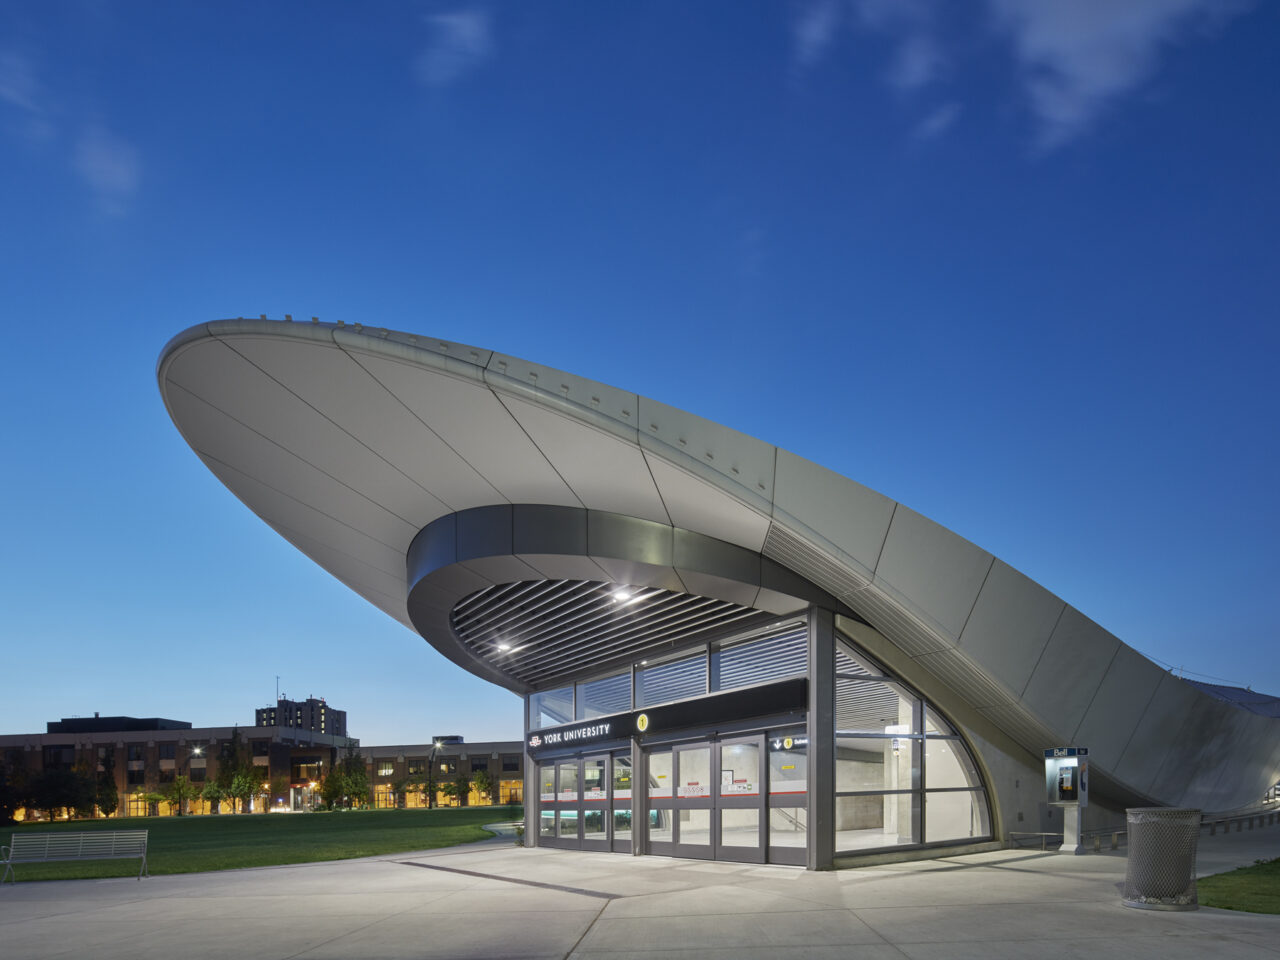 Front entrance photo of TTC York University Station in Toronto, Ontario shows curvature of the building.